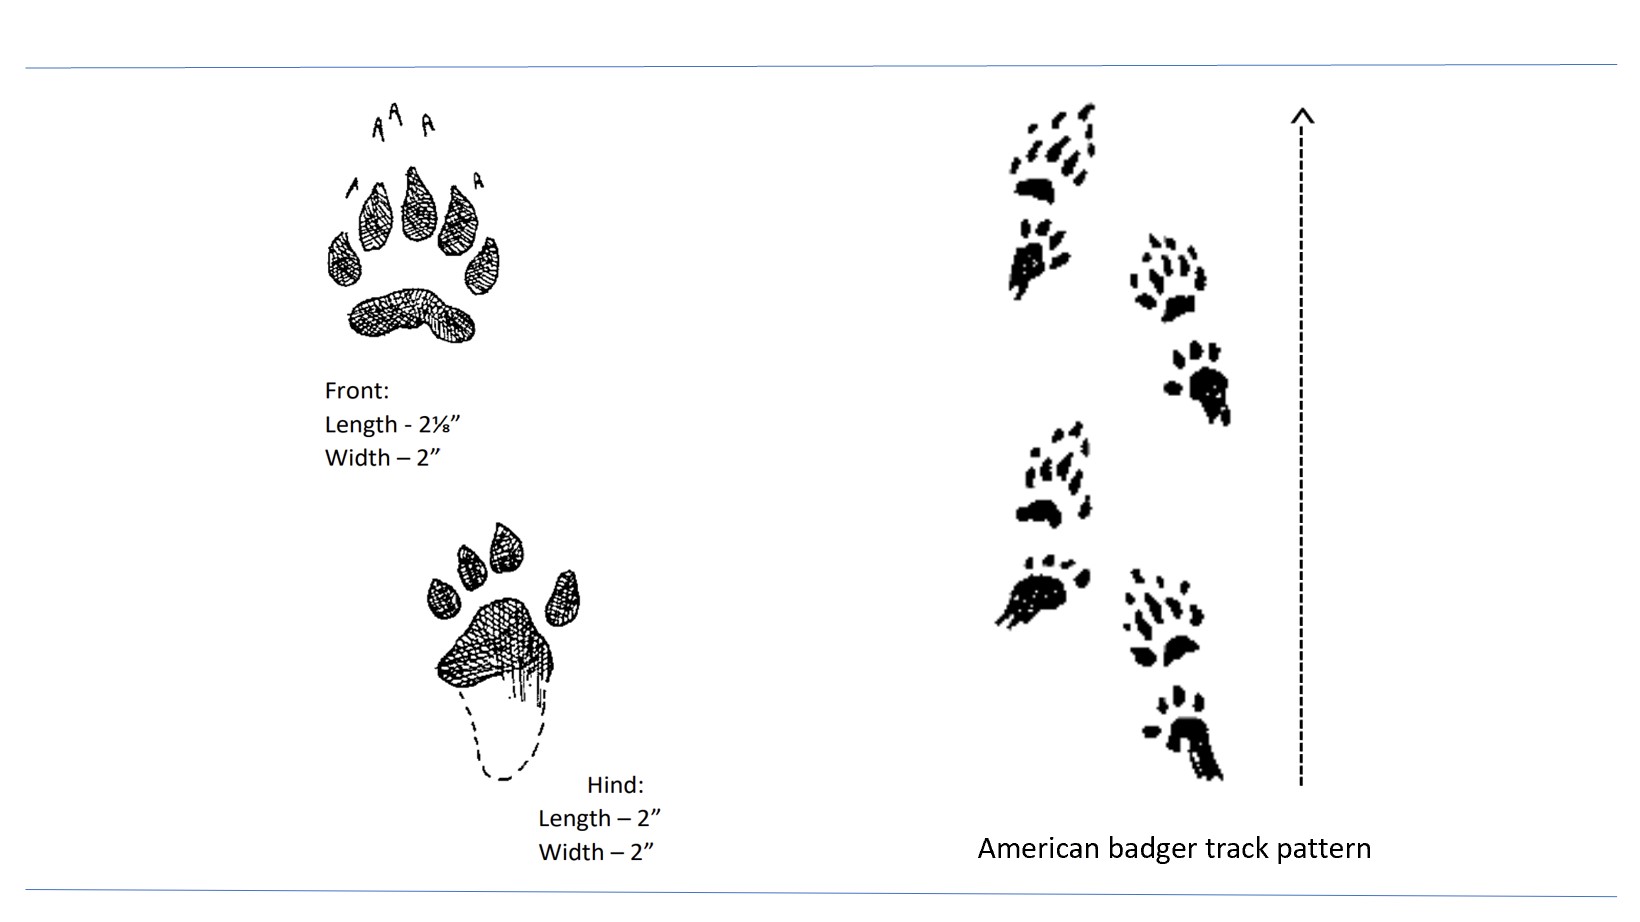 Illustrated tracks of the American badger.